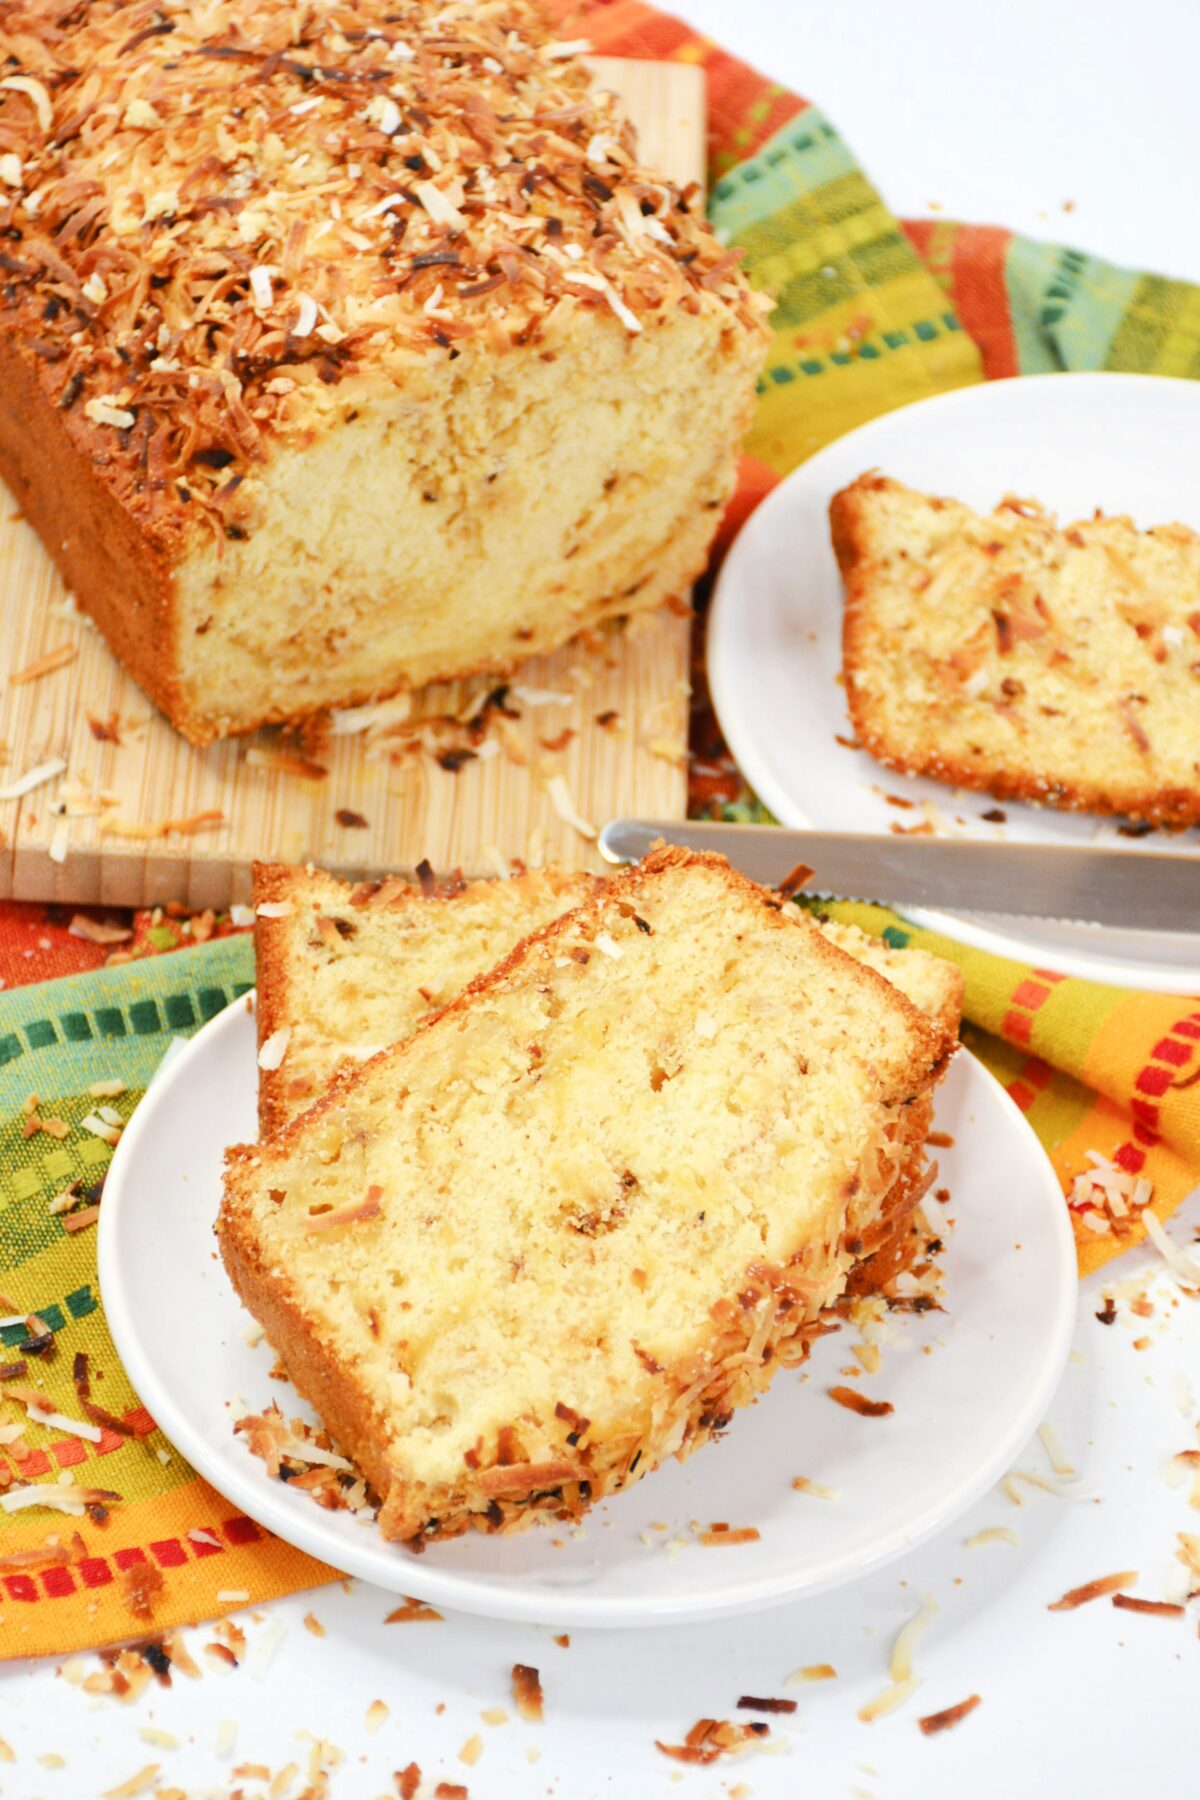 A sweet pineapple coconut bread recipe perfect for breakfast or dessert. It's easy to make and the combination of flavors is delicious.